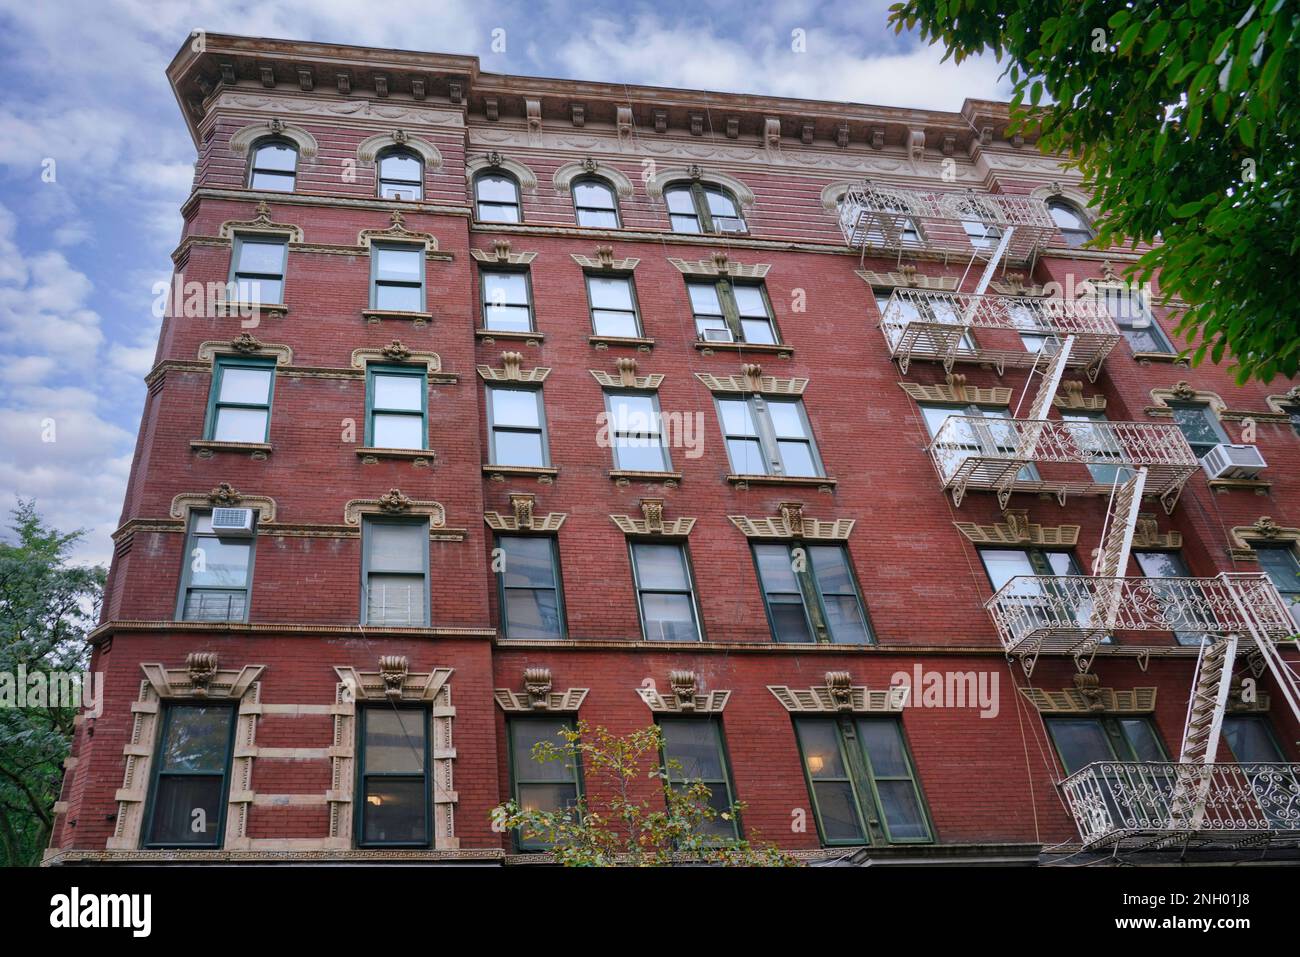 Old fashioned New York apartment building with decorative stone carvings around windows Stock Photo